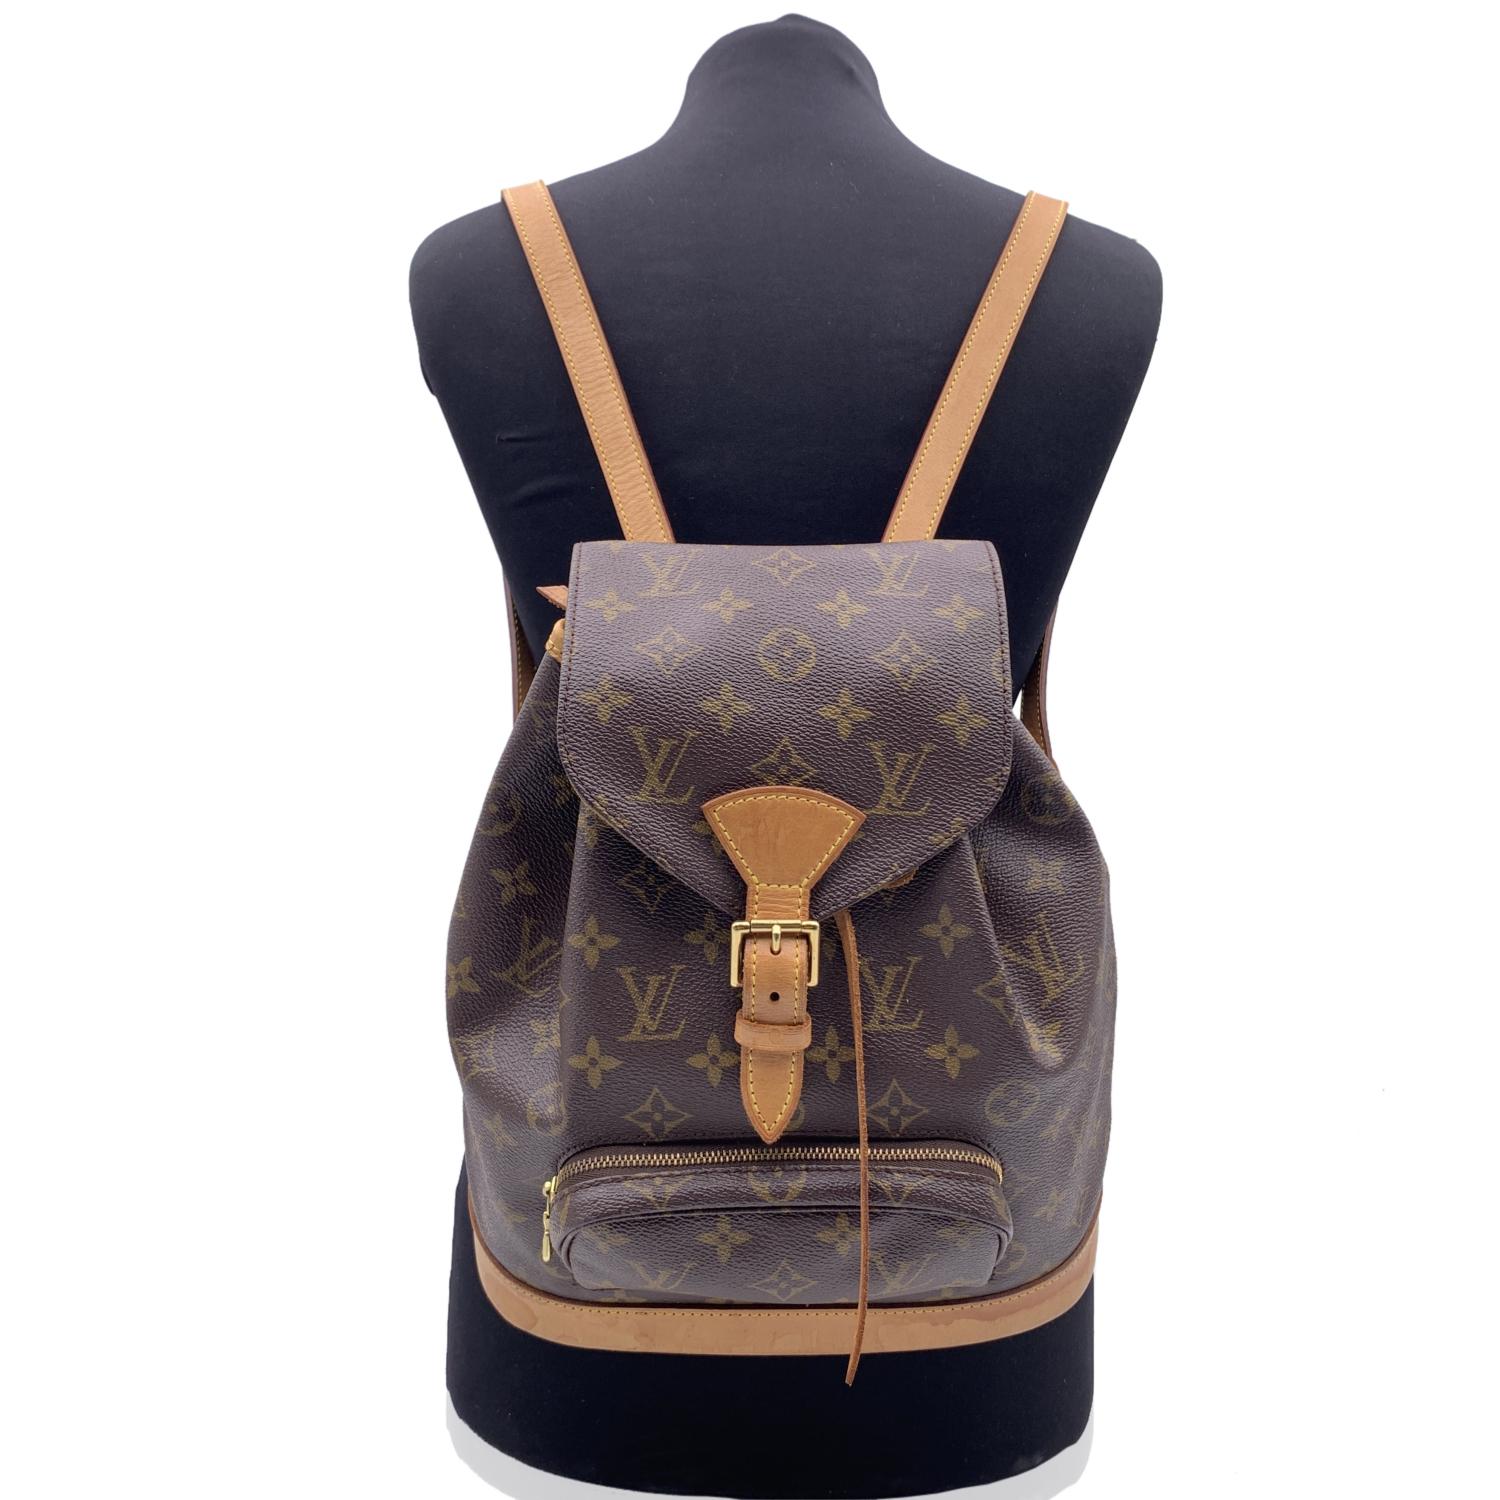 Casual yet sophisticated at the same time Louis Vuitton 'Montsouris MM' Backpack bag. Top is closed with flap with buckle closure and drawstring. 1 front zip pocket. Long and adjustable shoulder straps with gold metal hardware. Brown canvas